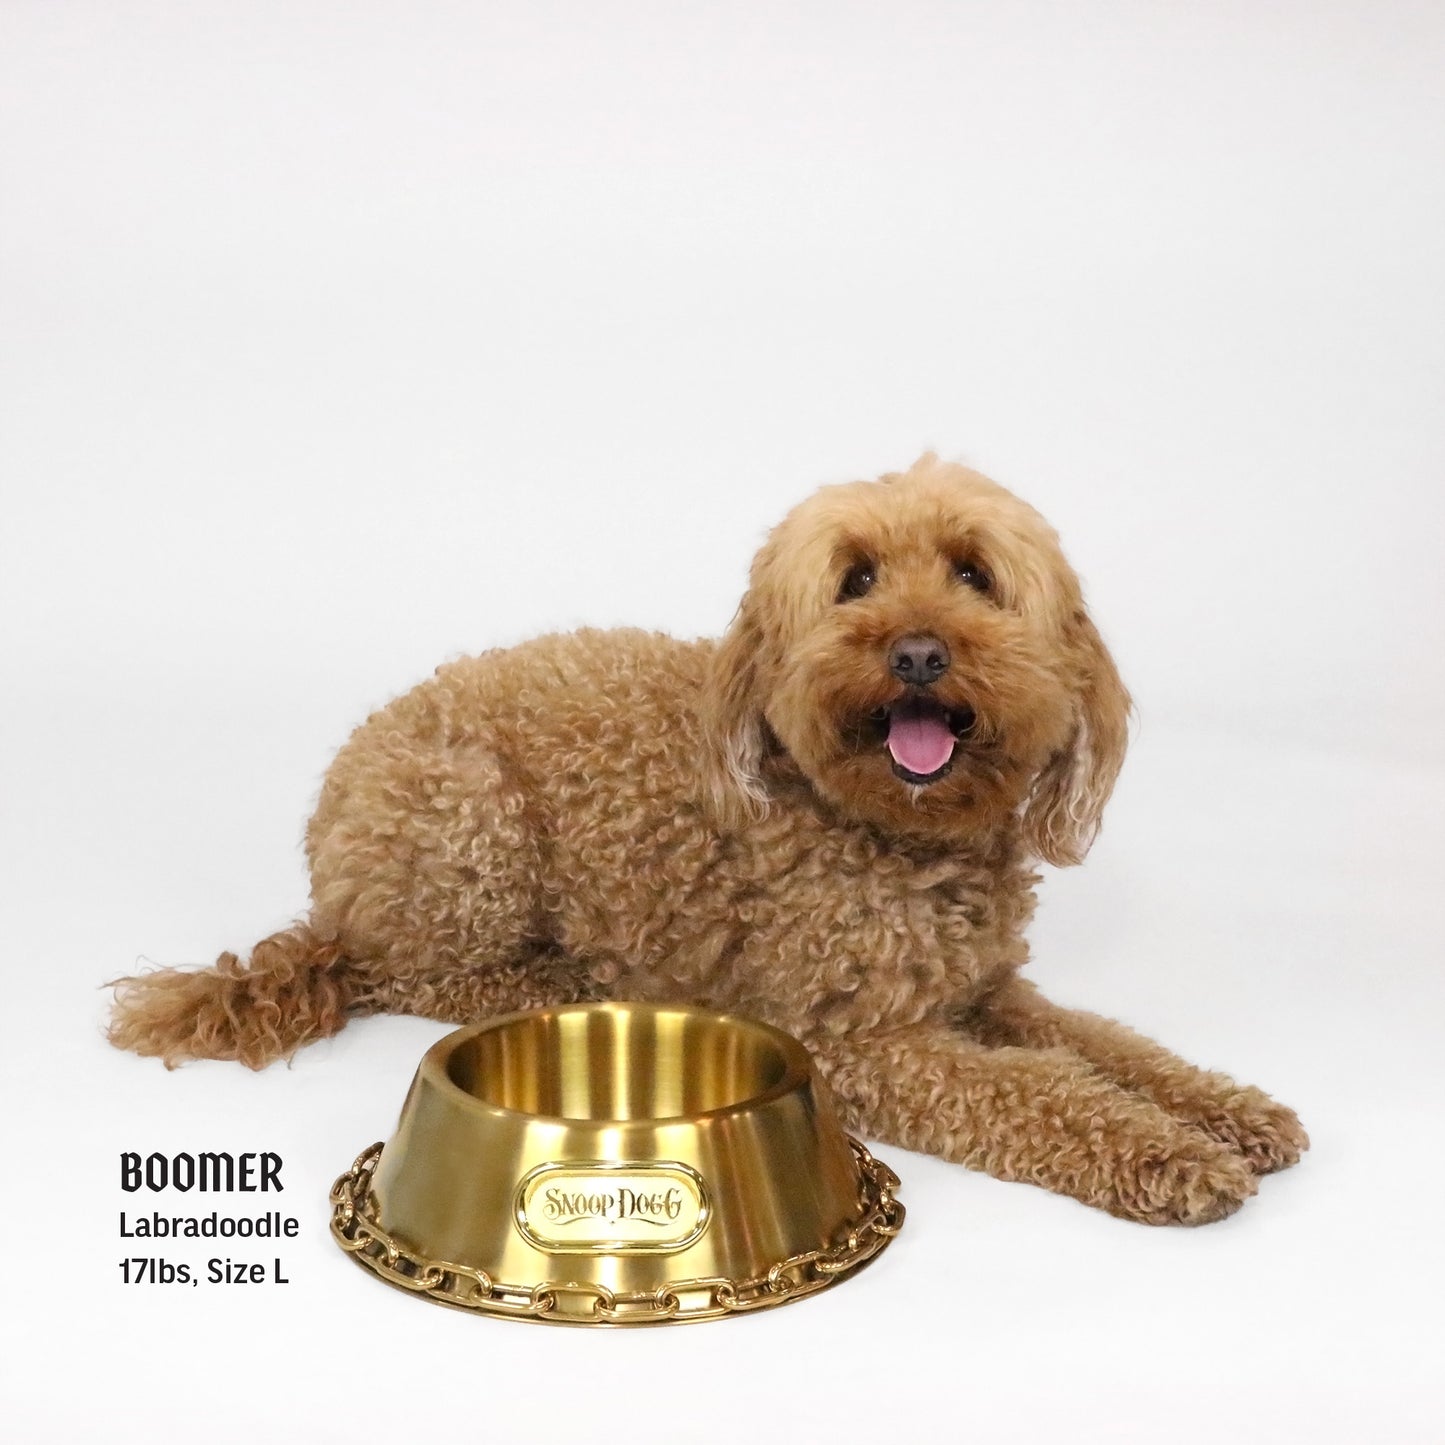 Boomer the Labradoodle laying next to the Large Deluxe Gold Pet Bowl.